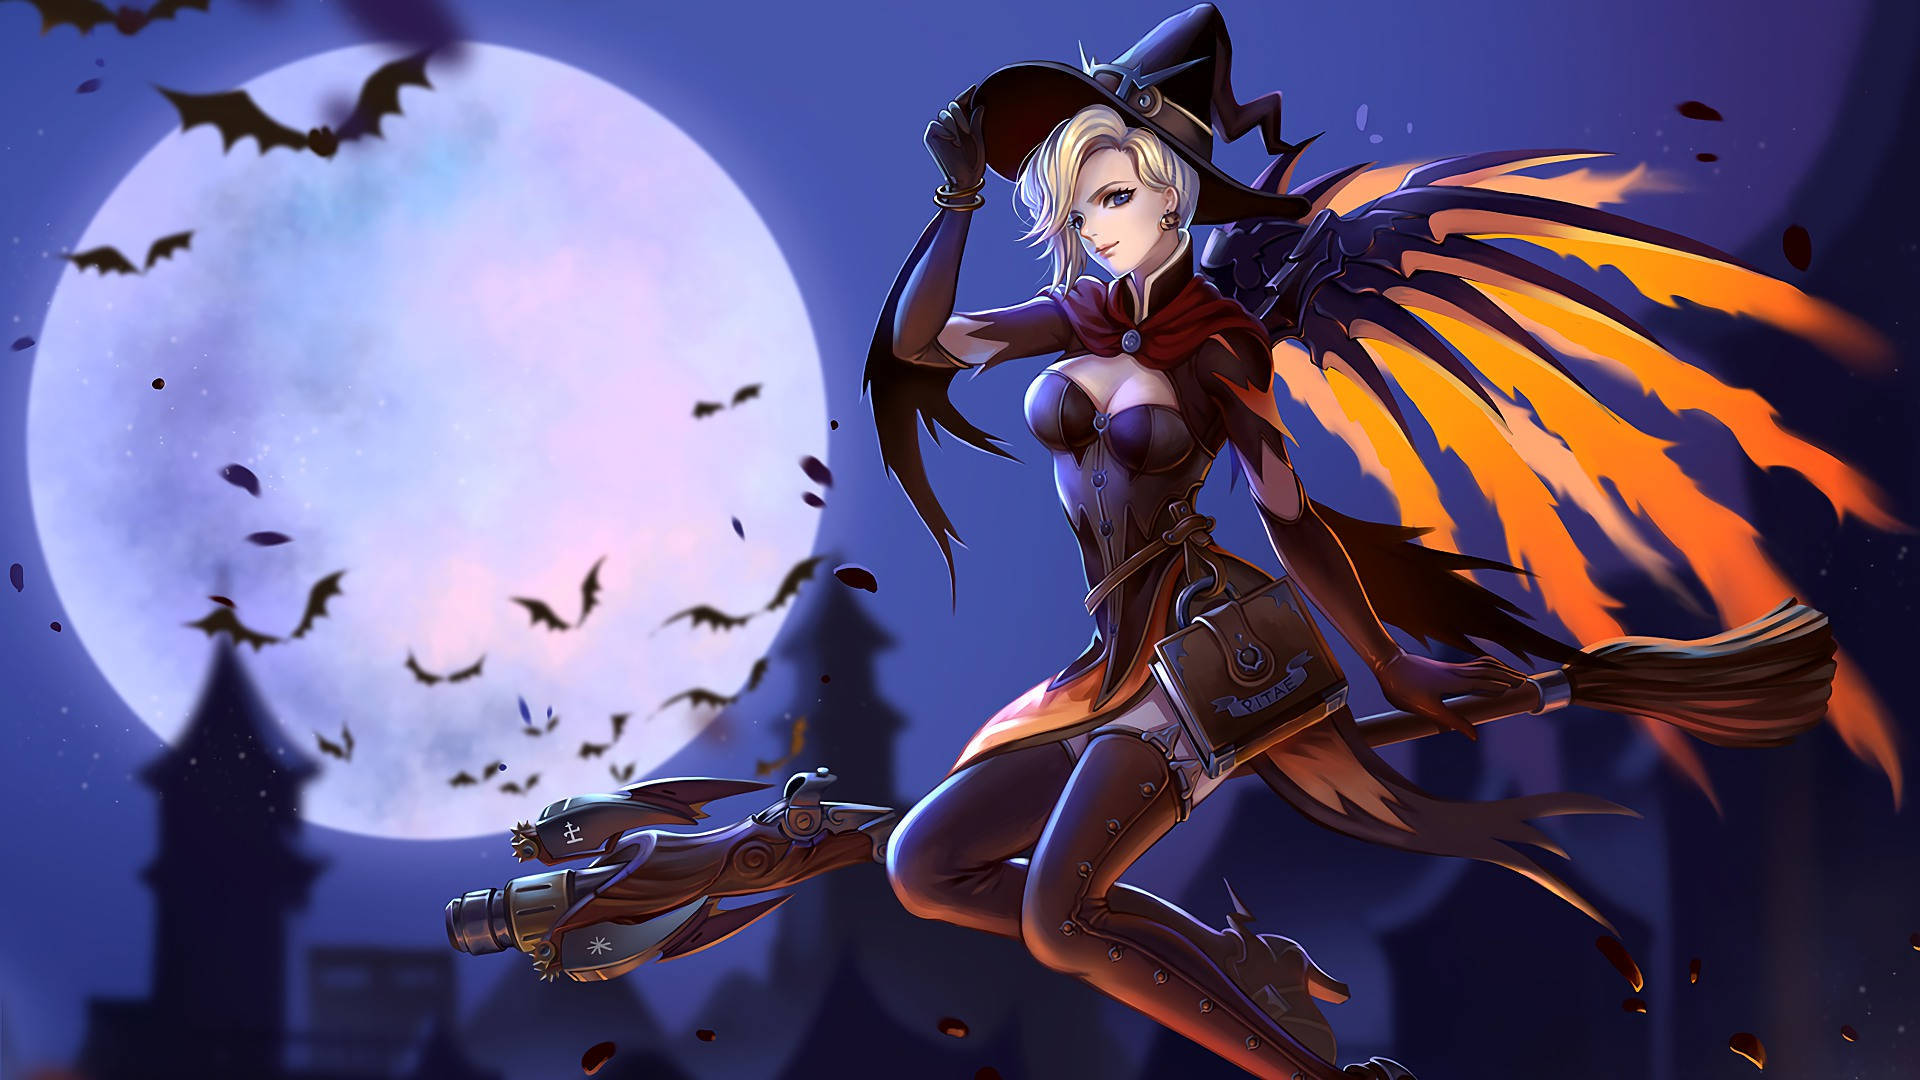 Witchy Anime Girl On Broomstick Wallpaper